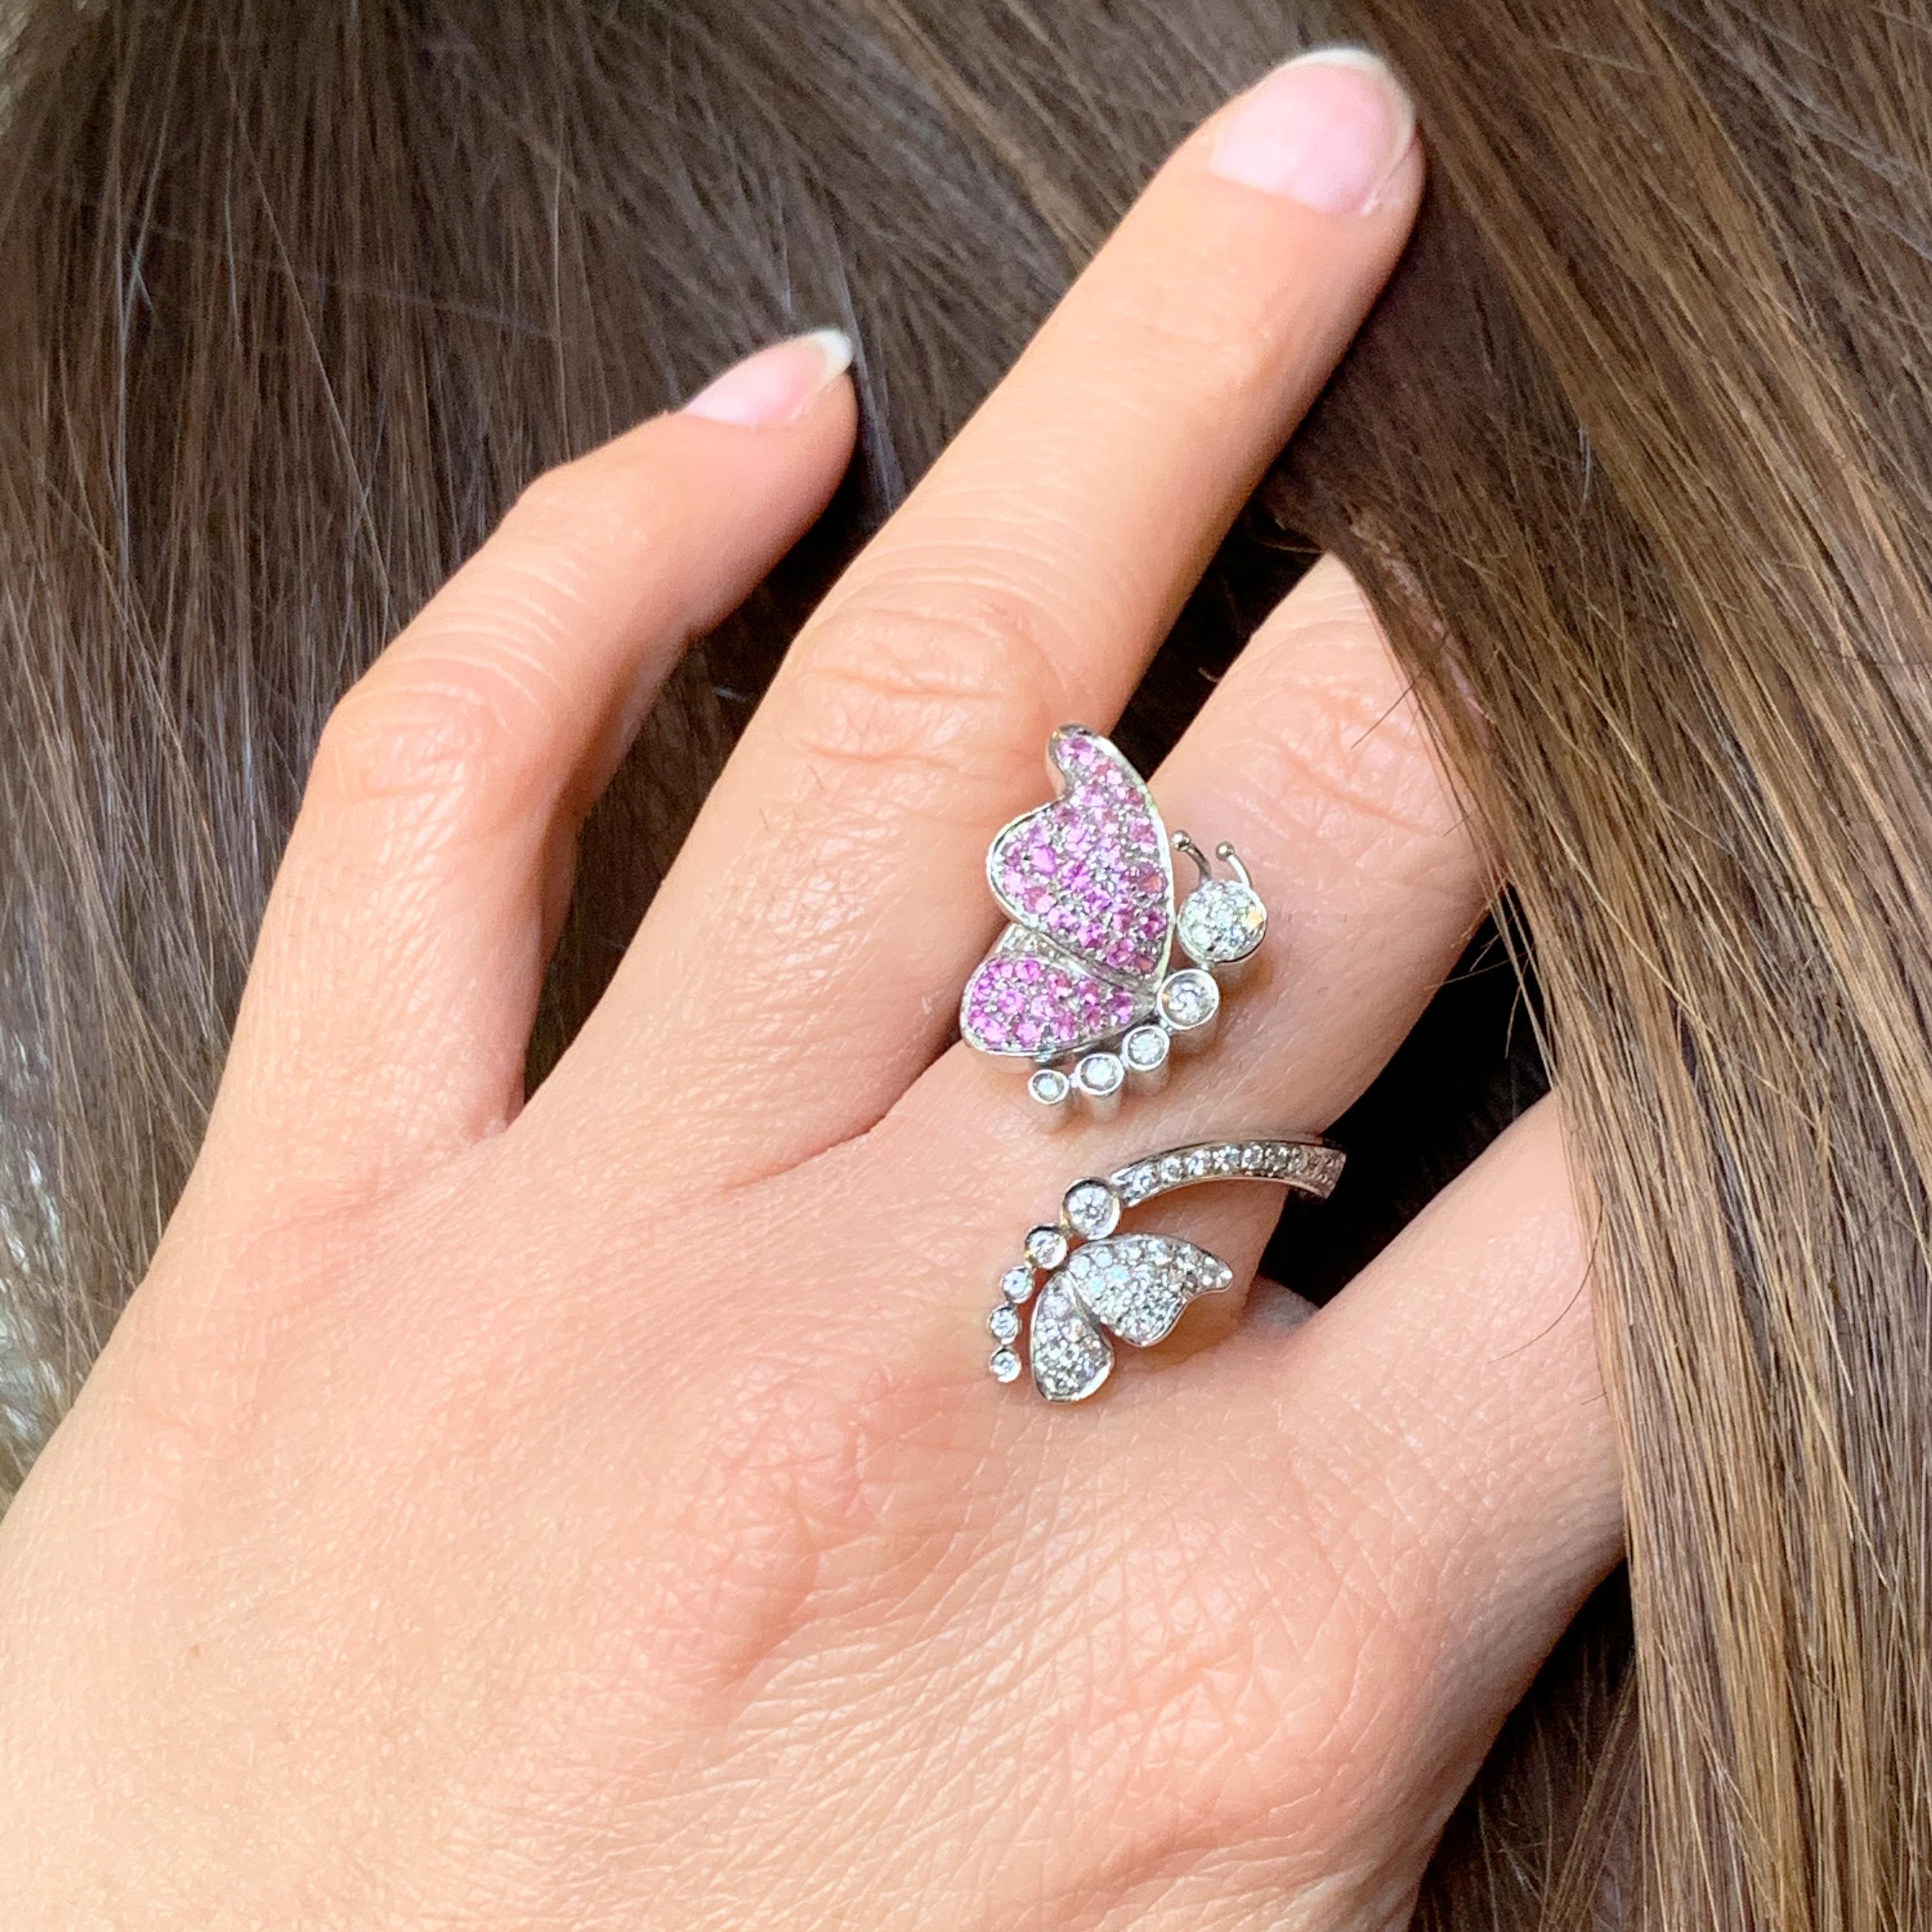 18 Karat Gold Pink Sapphire and Diamond Butterfly Ring fine jewel.
Stunning Italian 18 Kt White Gold Creation, very elegant. Features many pink sapphires and small white diamonds set into the Butterfly wings. This exquisite ring is adorned by the